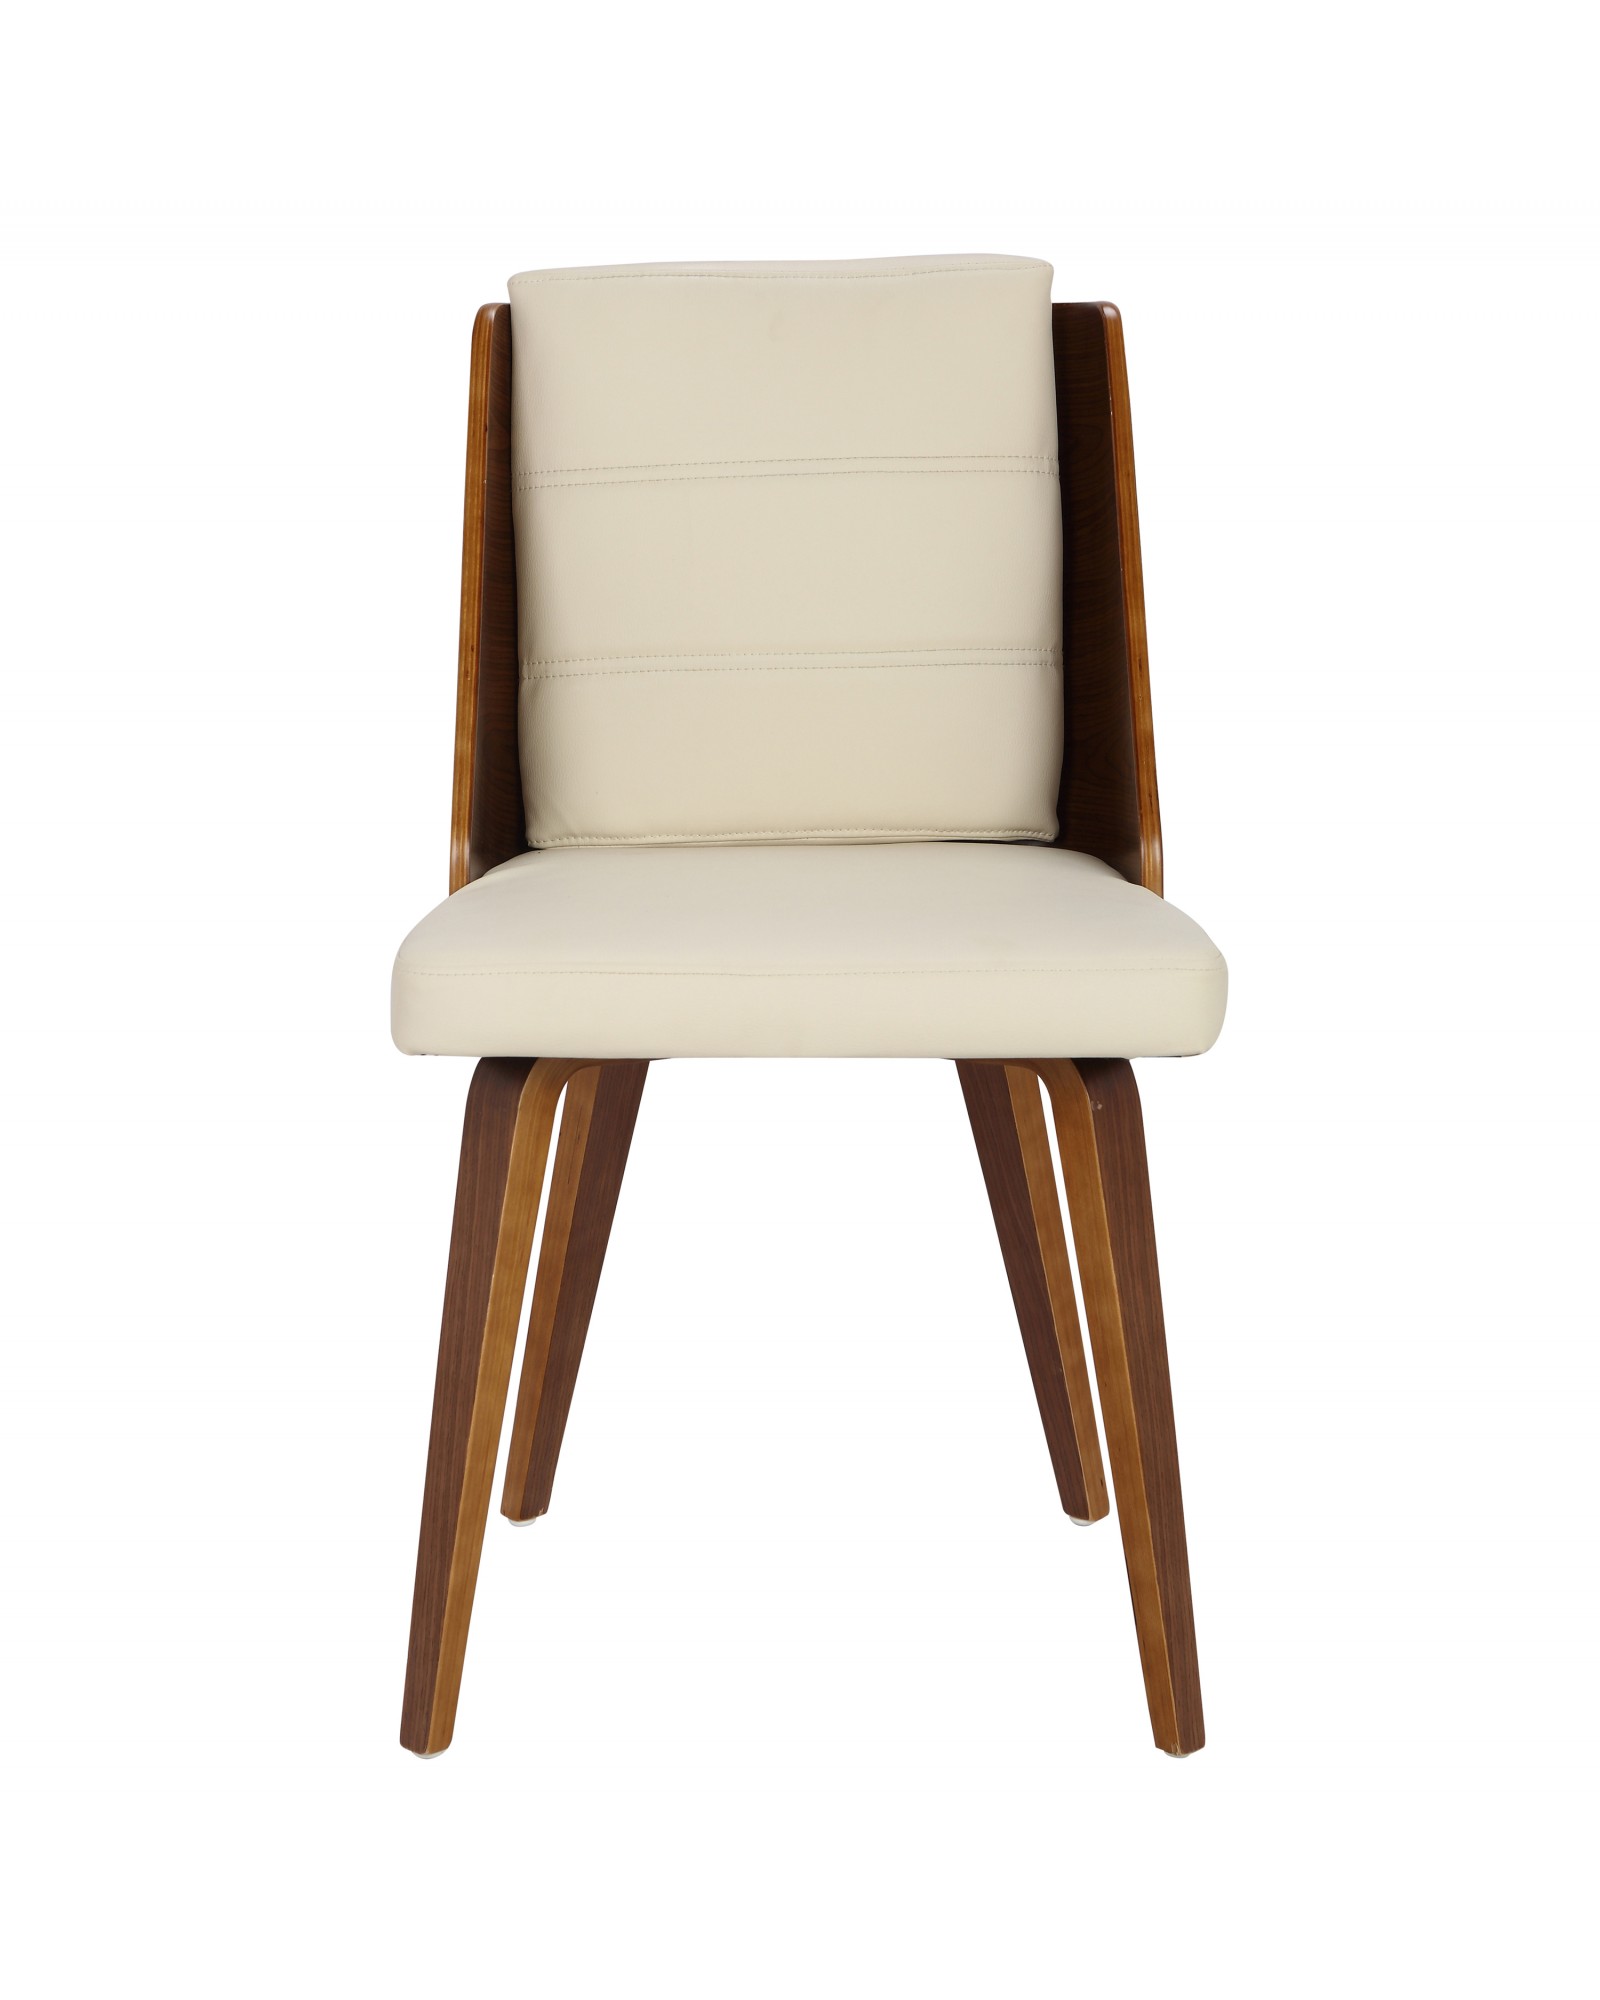 Galanti Mid-Century Modern Dining/Accent Chair in Walnut and Cream Faux Leather - Set of 2